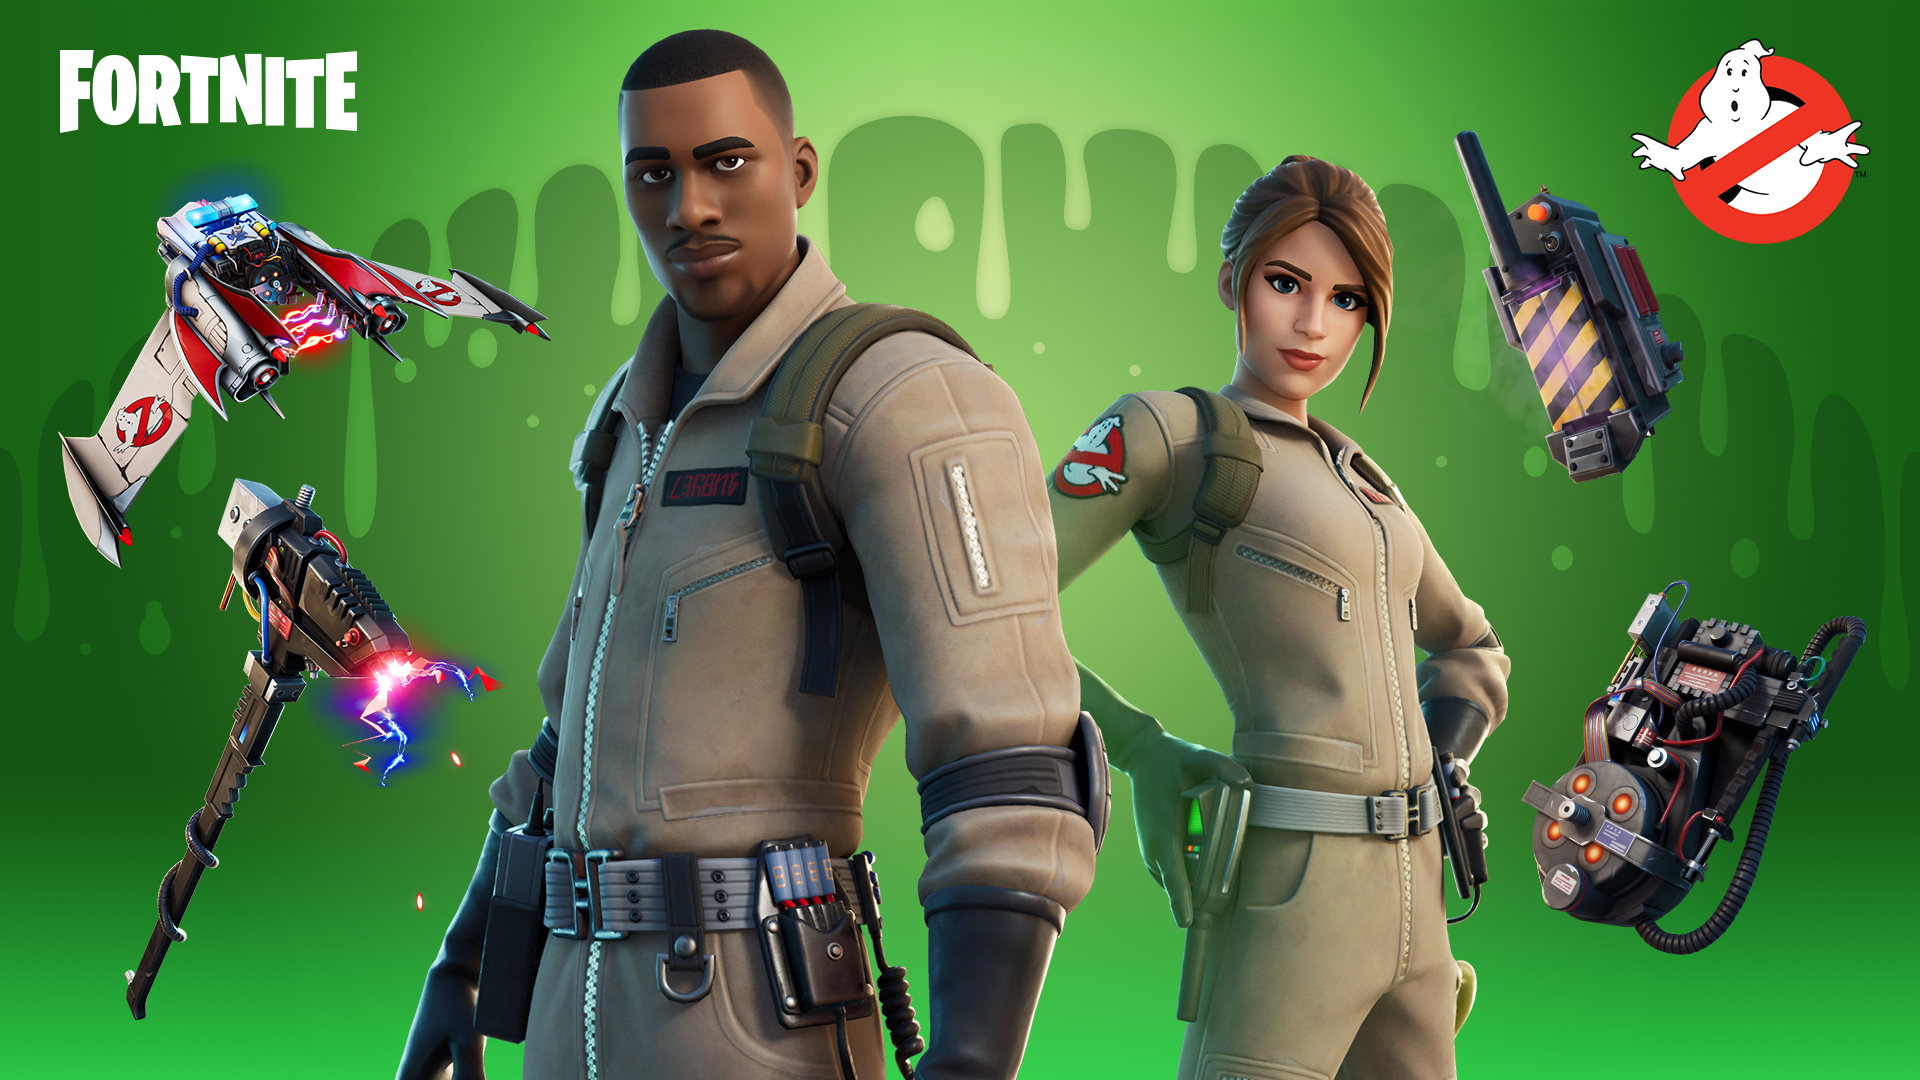 Celebrate Halloween With New Fortnite Ghostbusters Skins And Cosmetics